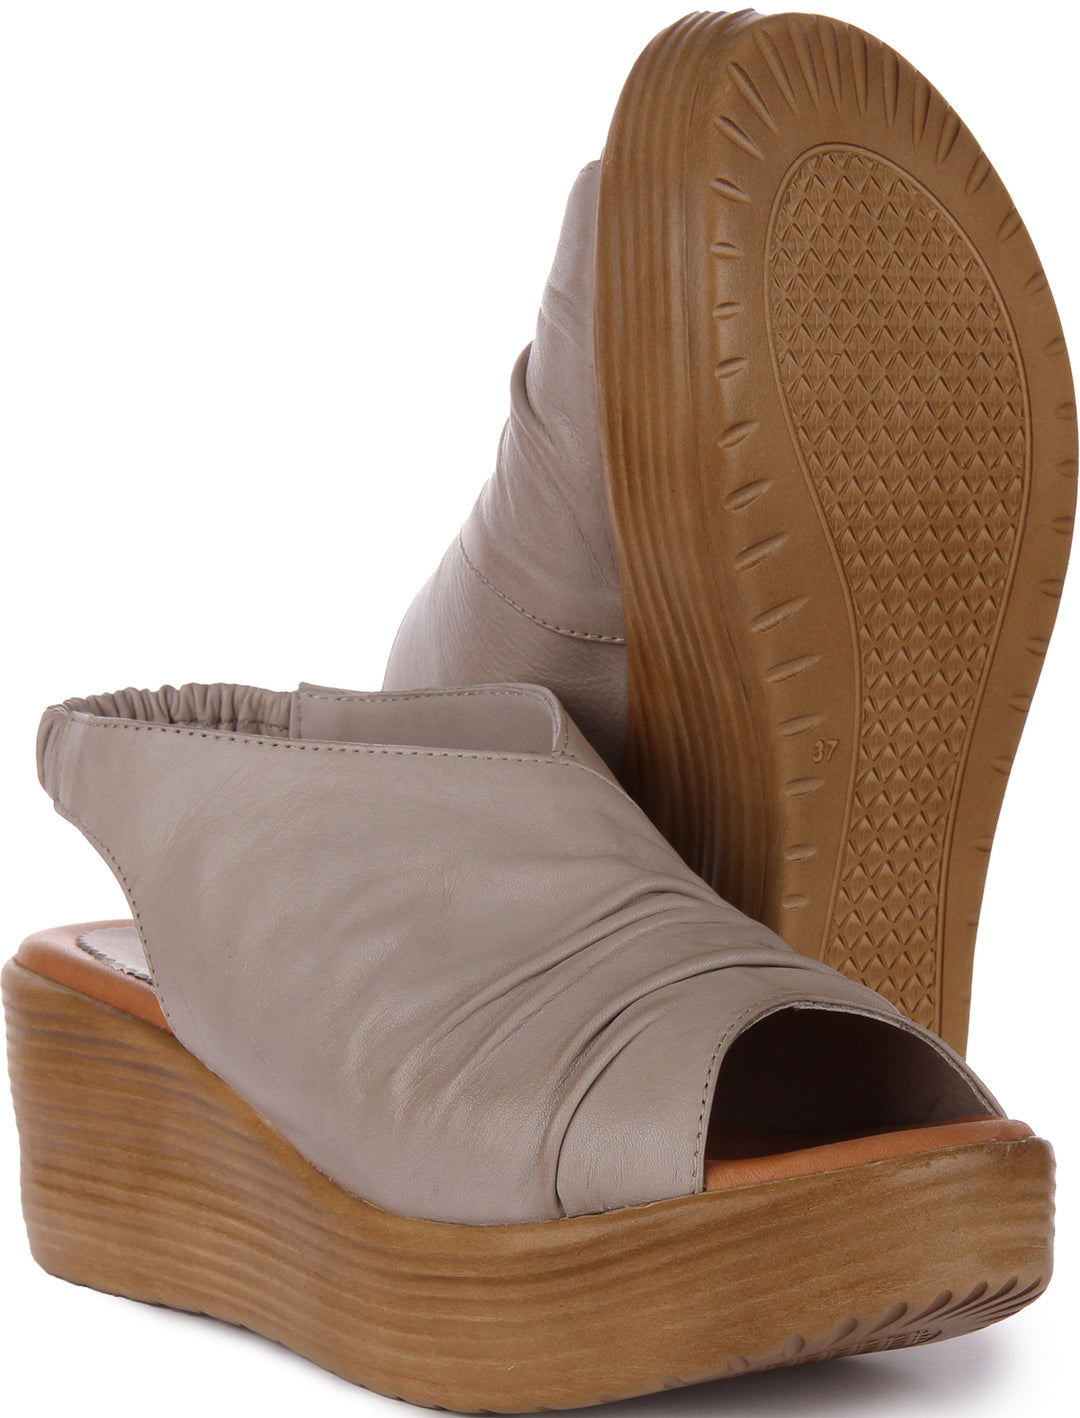 Justinreess England Dilla In Stone For Women